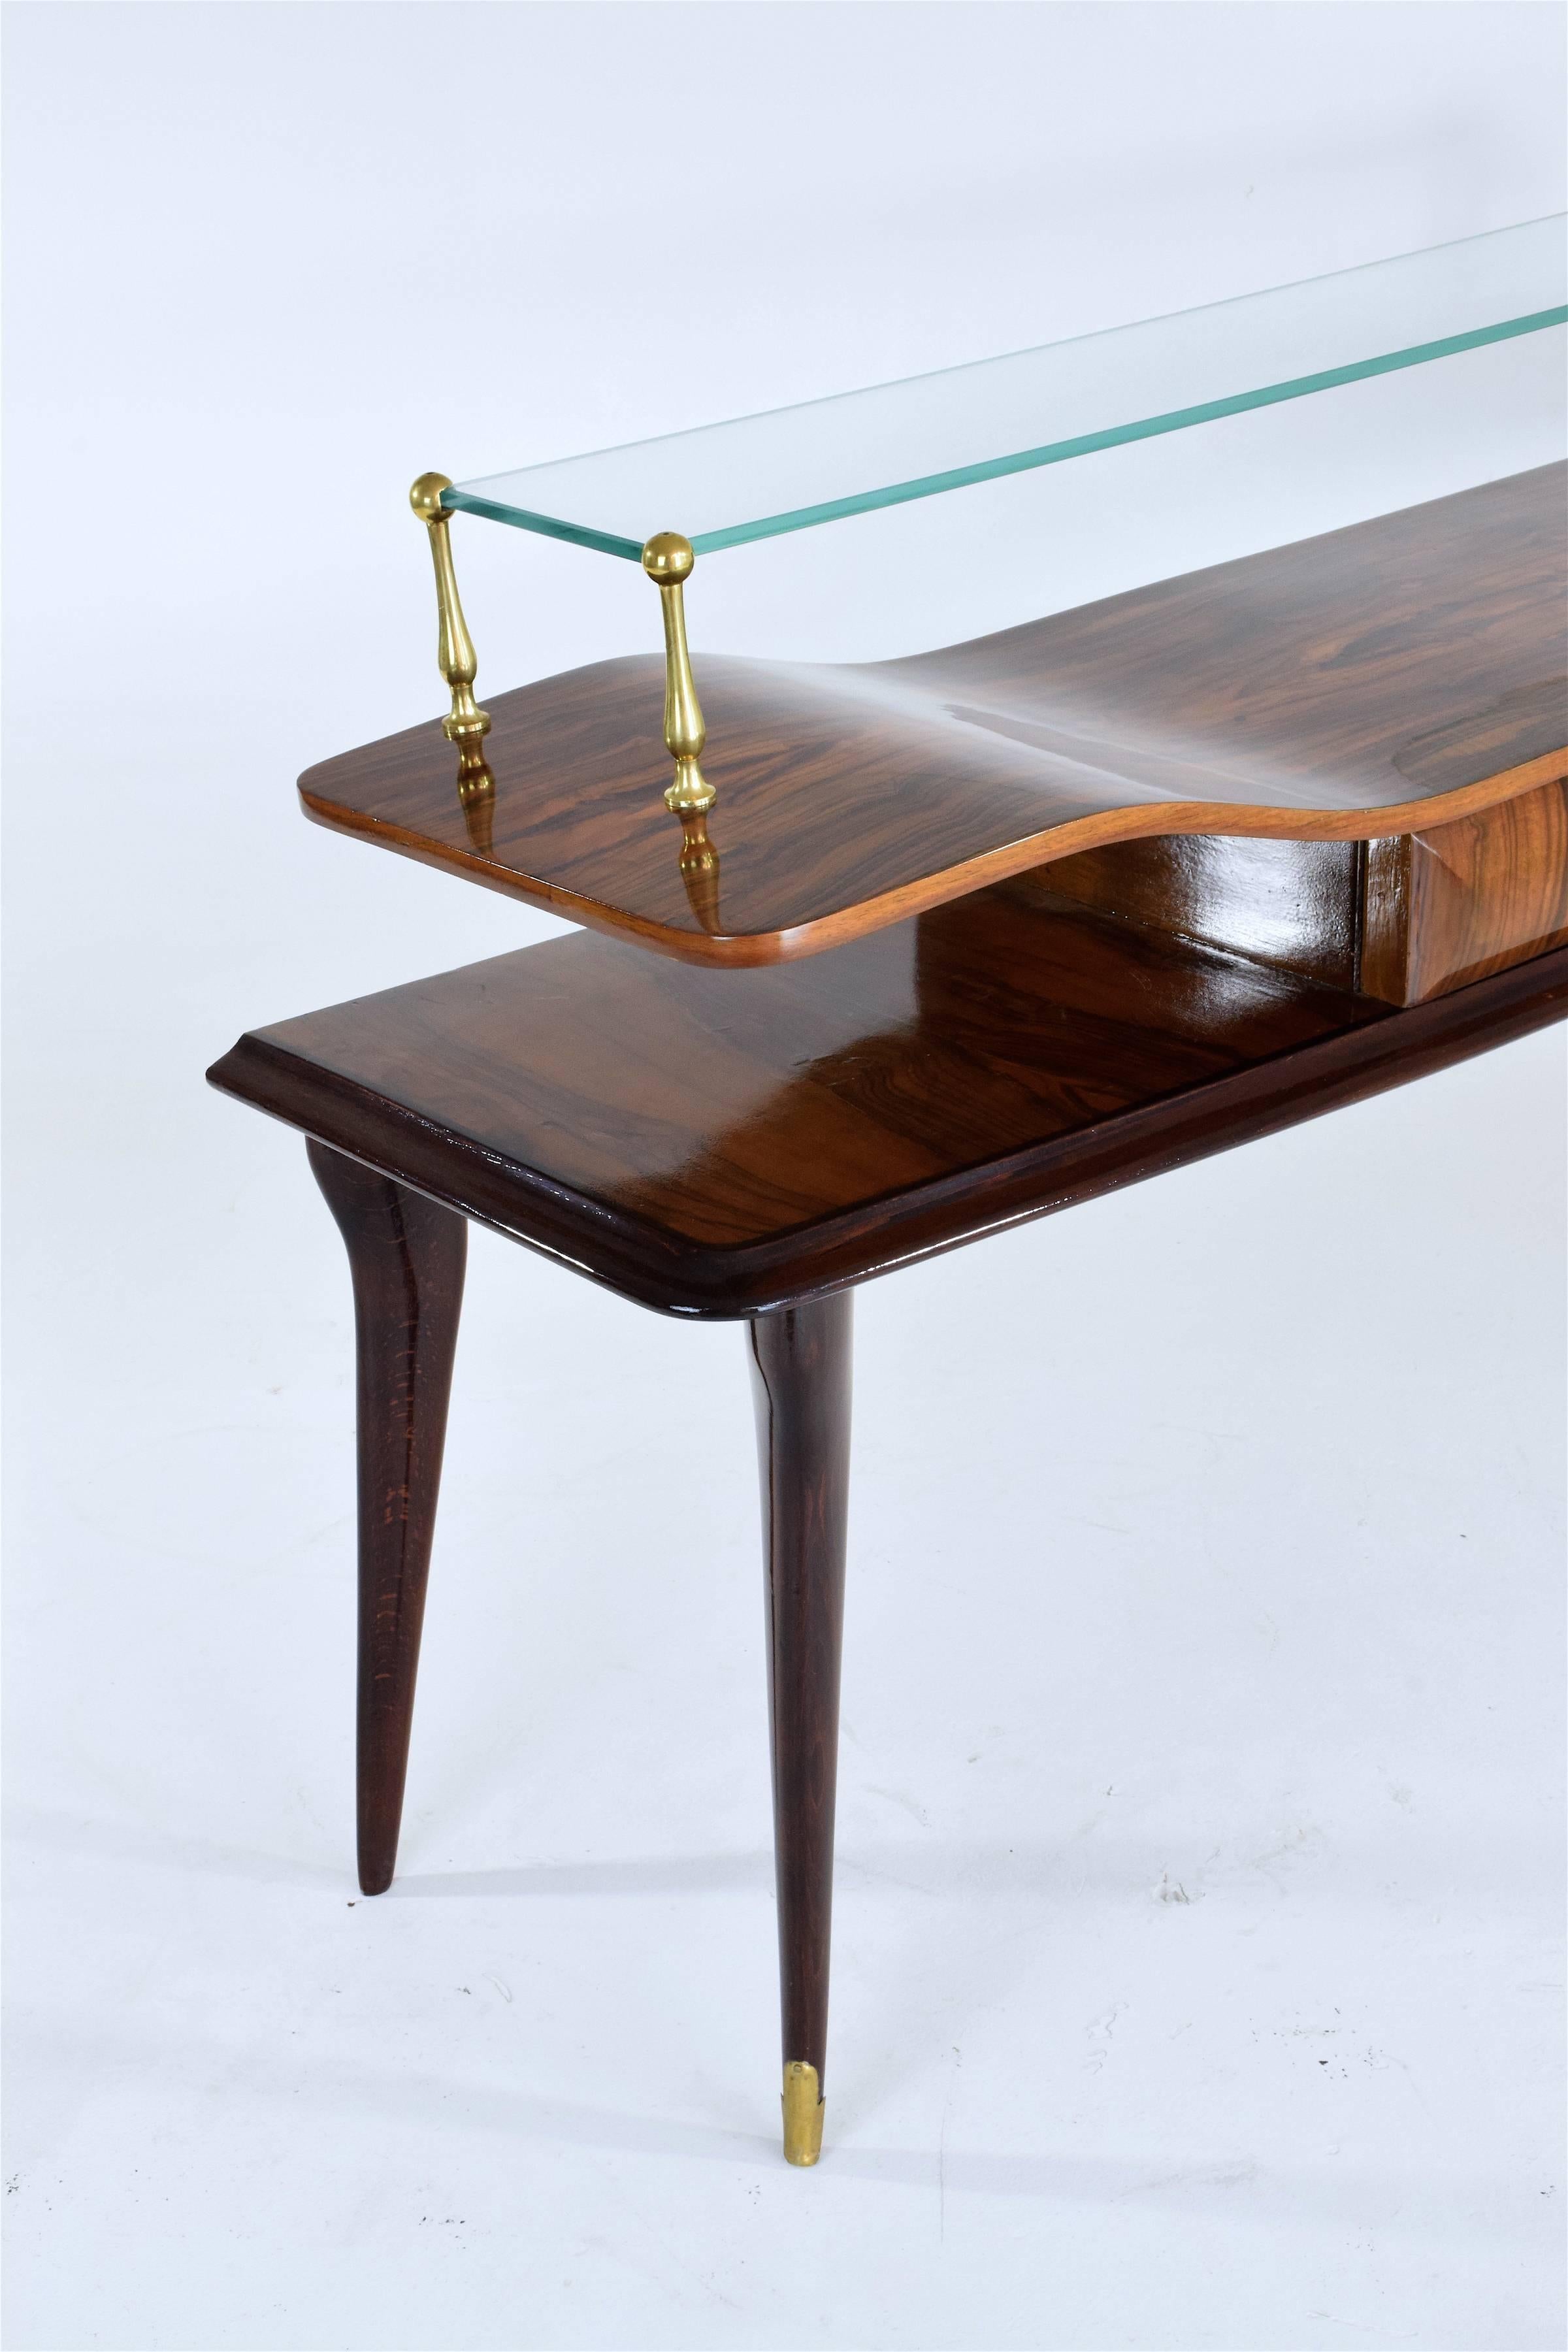 Italian 20th century design vintage low curved console table or sideboard in veneered wood composed of its original glass shelf, sculpted brass details and a central drawer. The splayed legs are adorned with brass endings.

In beautiful restored